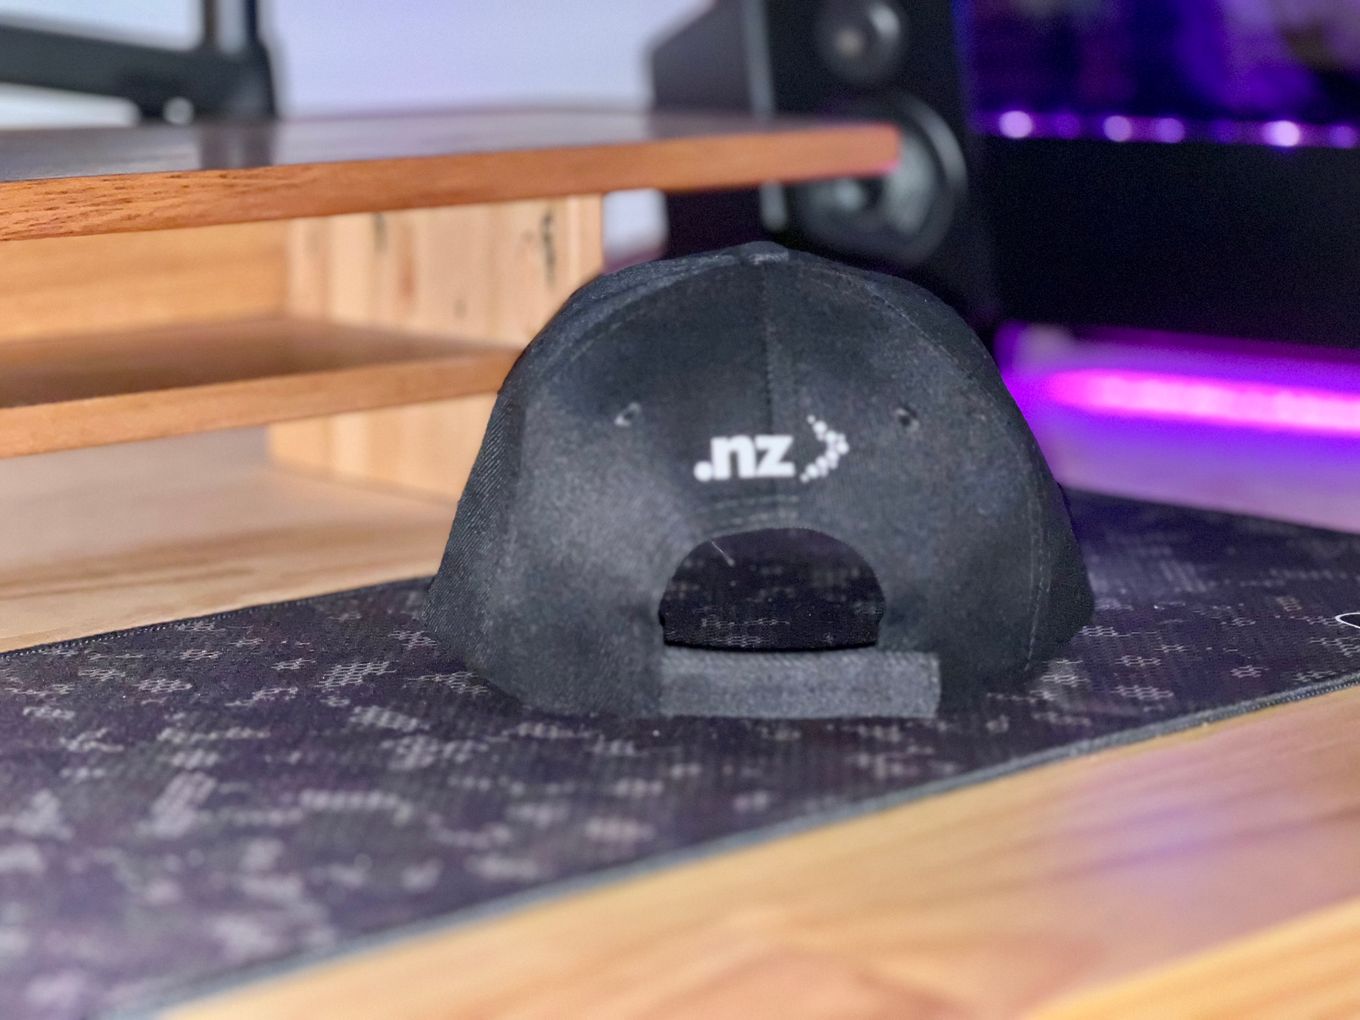 A black hat with InternetNZ branding sitting on top of a wooden table.